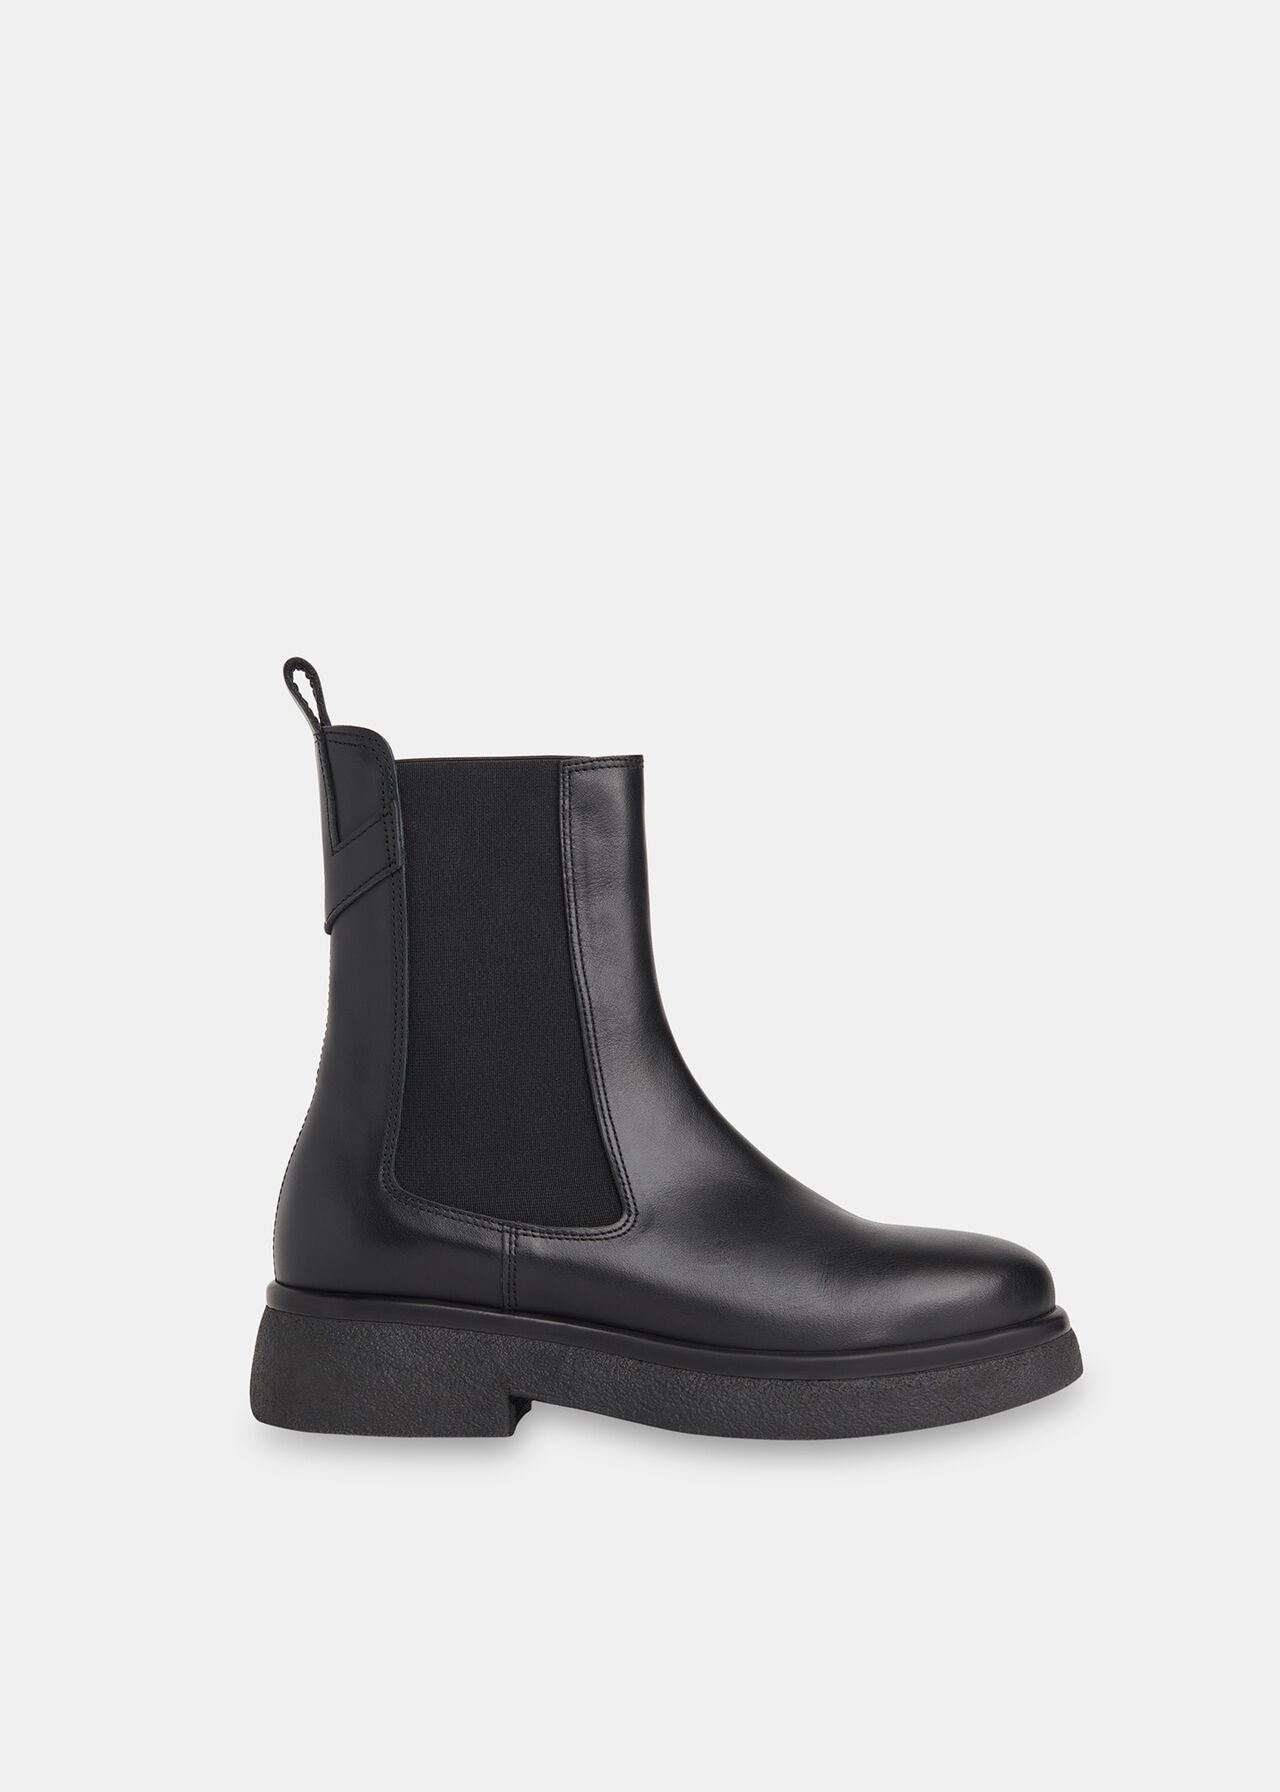 The Best Timeless Chelsea Boots For Women To Buy This Winter | Who What ...